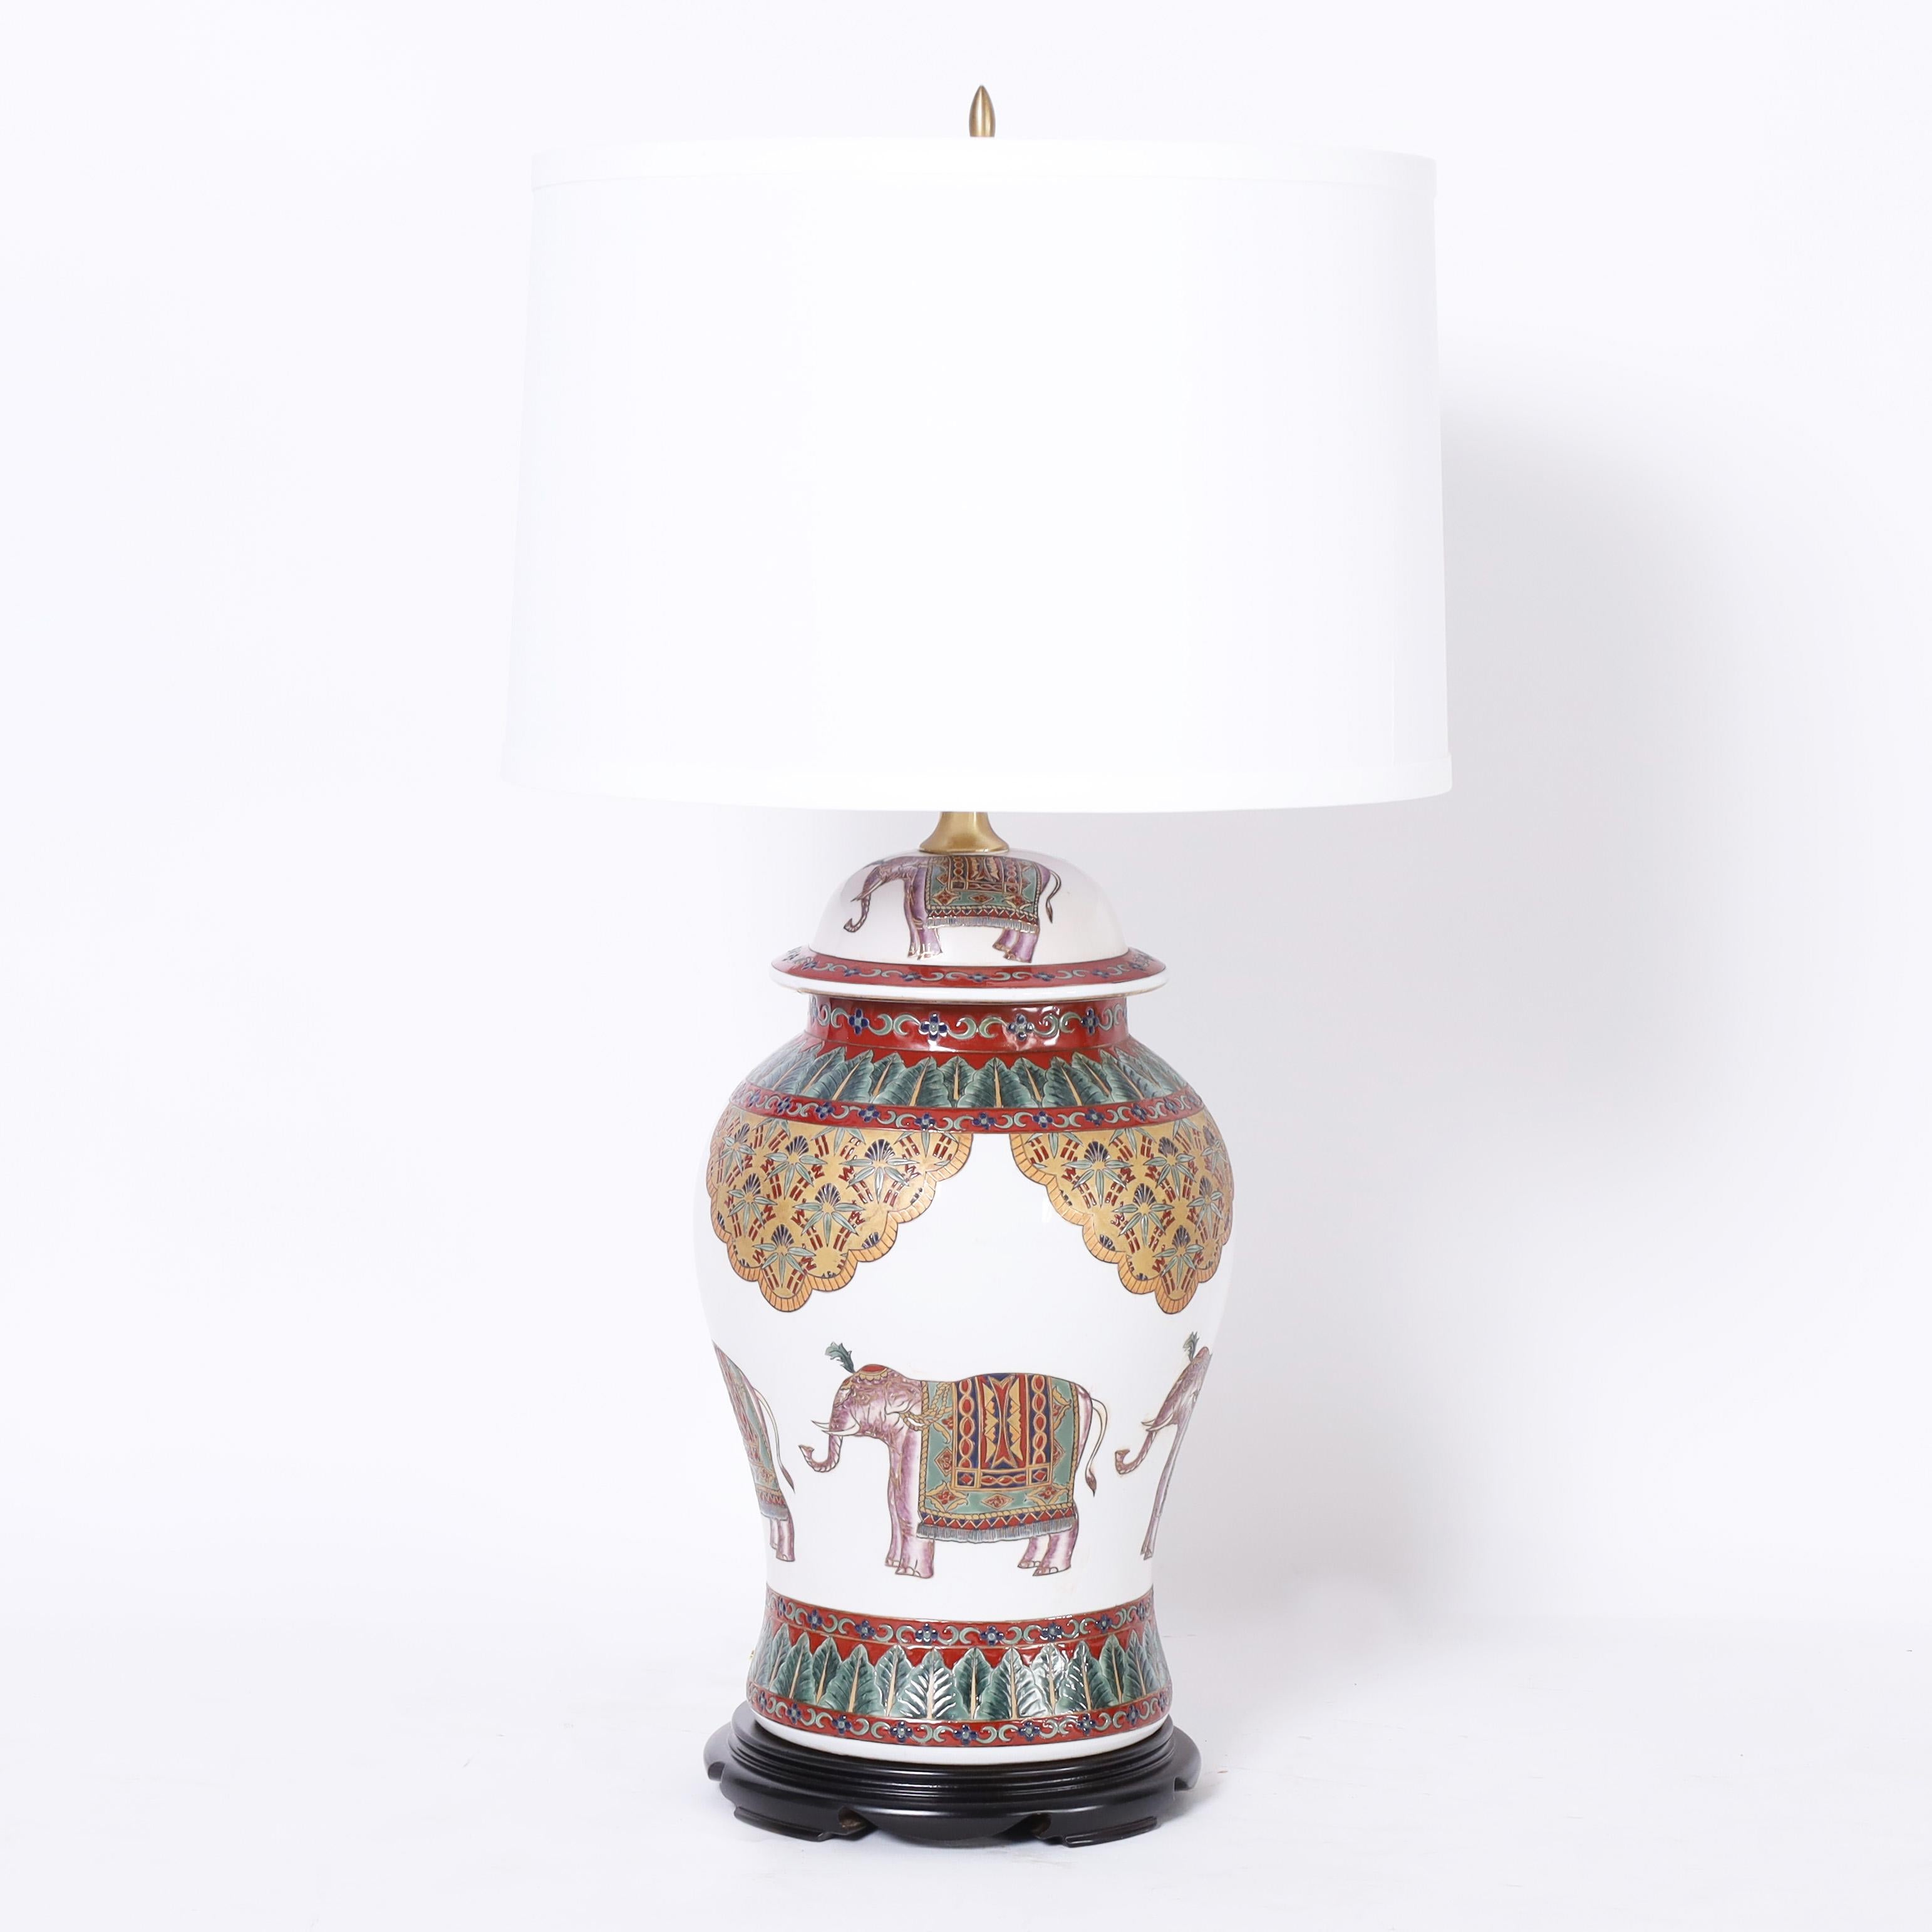 British colonial style pair of porcelain table lamps with classic ginger jar form hand decorated with elephants and floral motifs. Signed Oriental Accent on the bottoms.